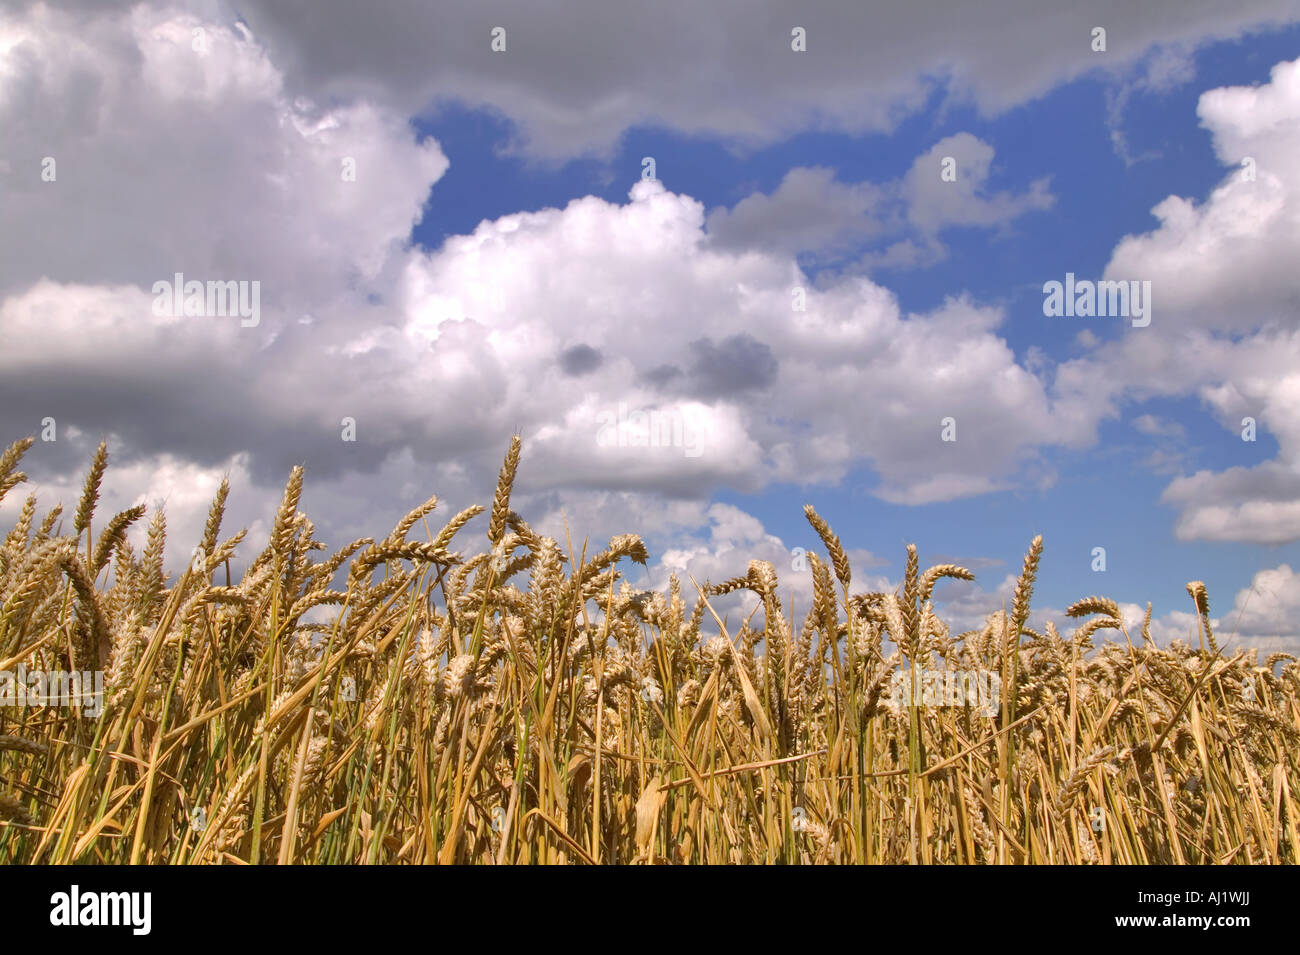 Wheat field under a blue cloudy sky Stock Photo